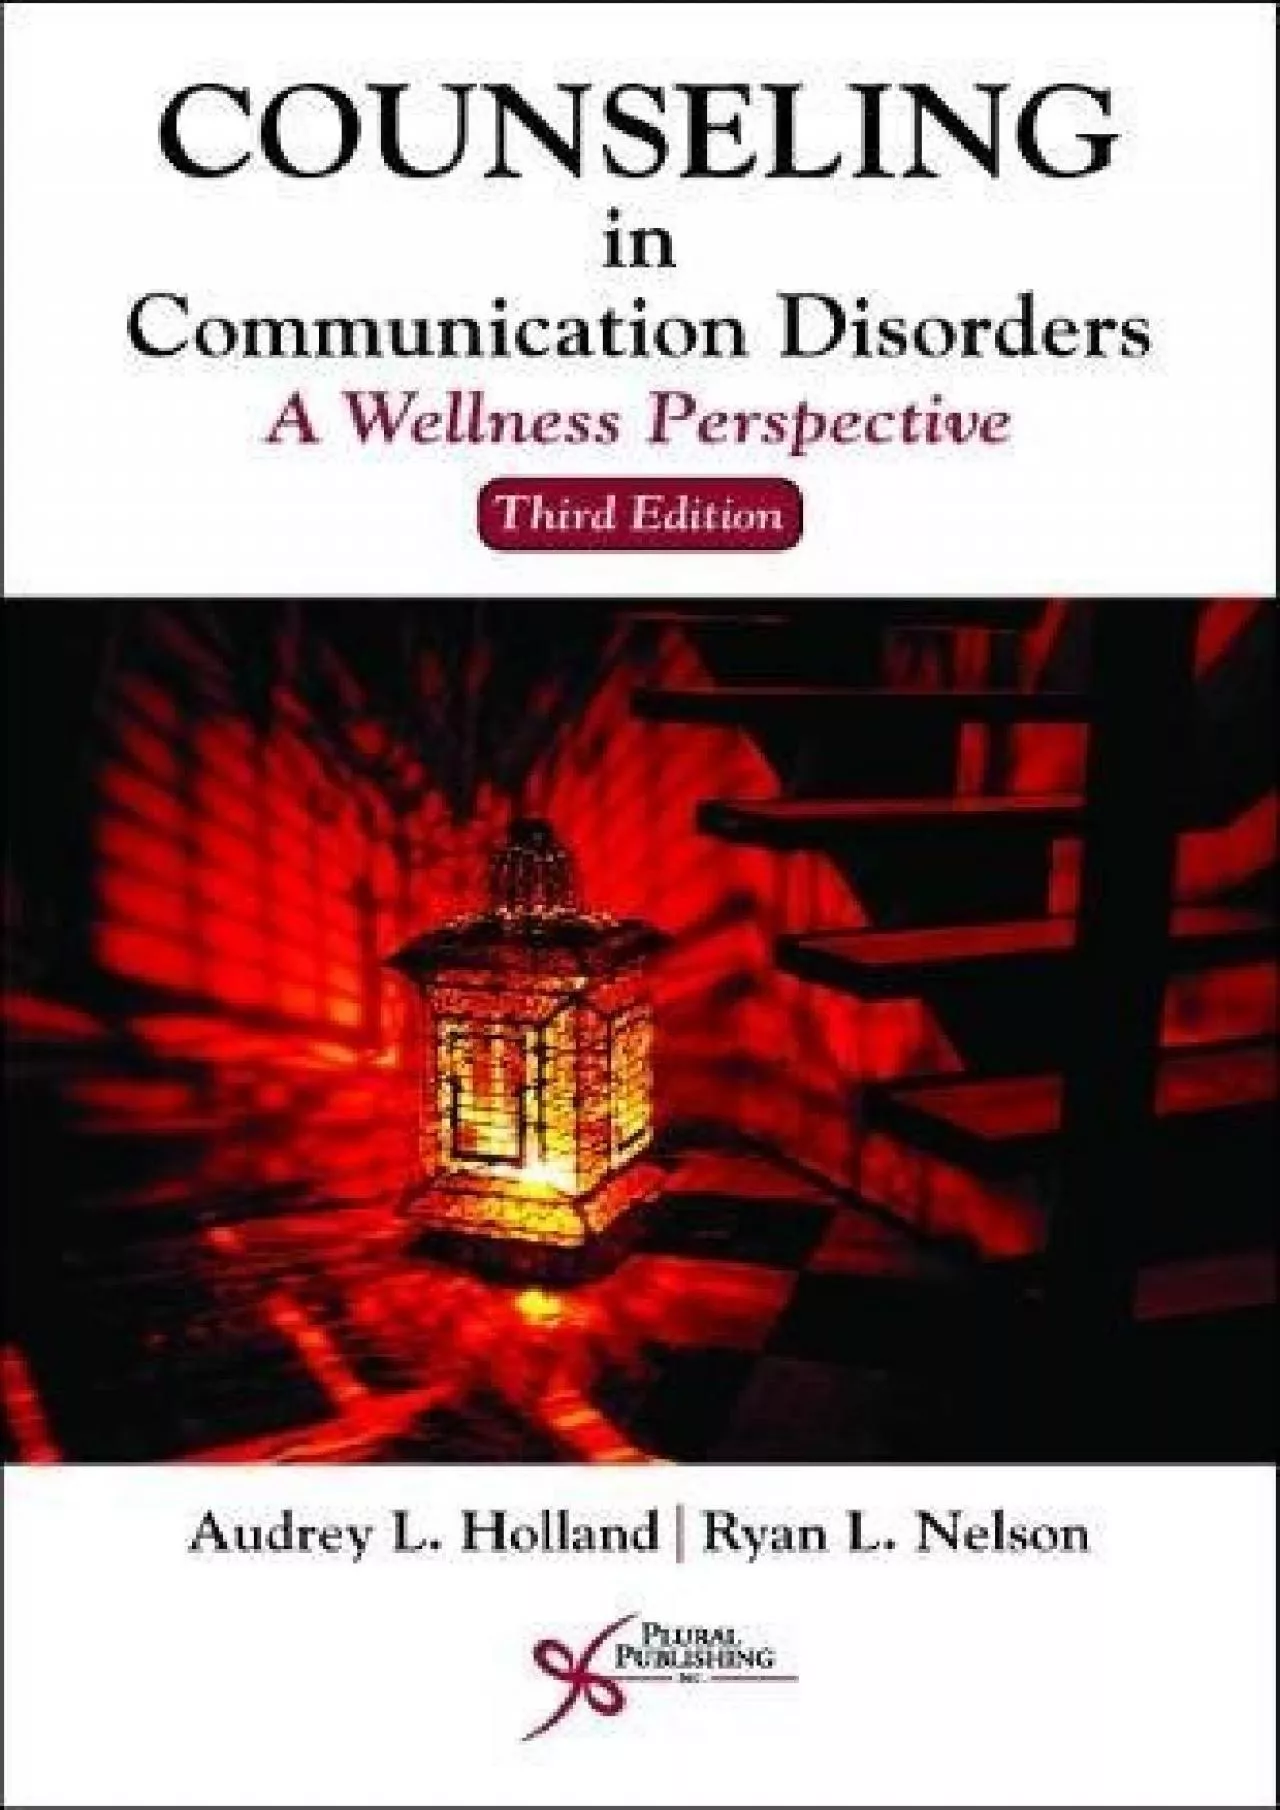 (EBOOK)-Counseling in Communication Disorders: A Wellness Perspective, Third Edition